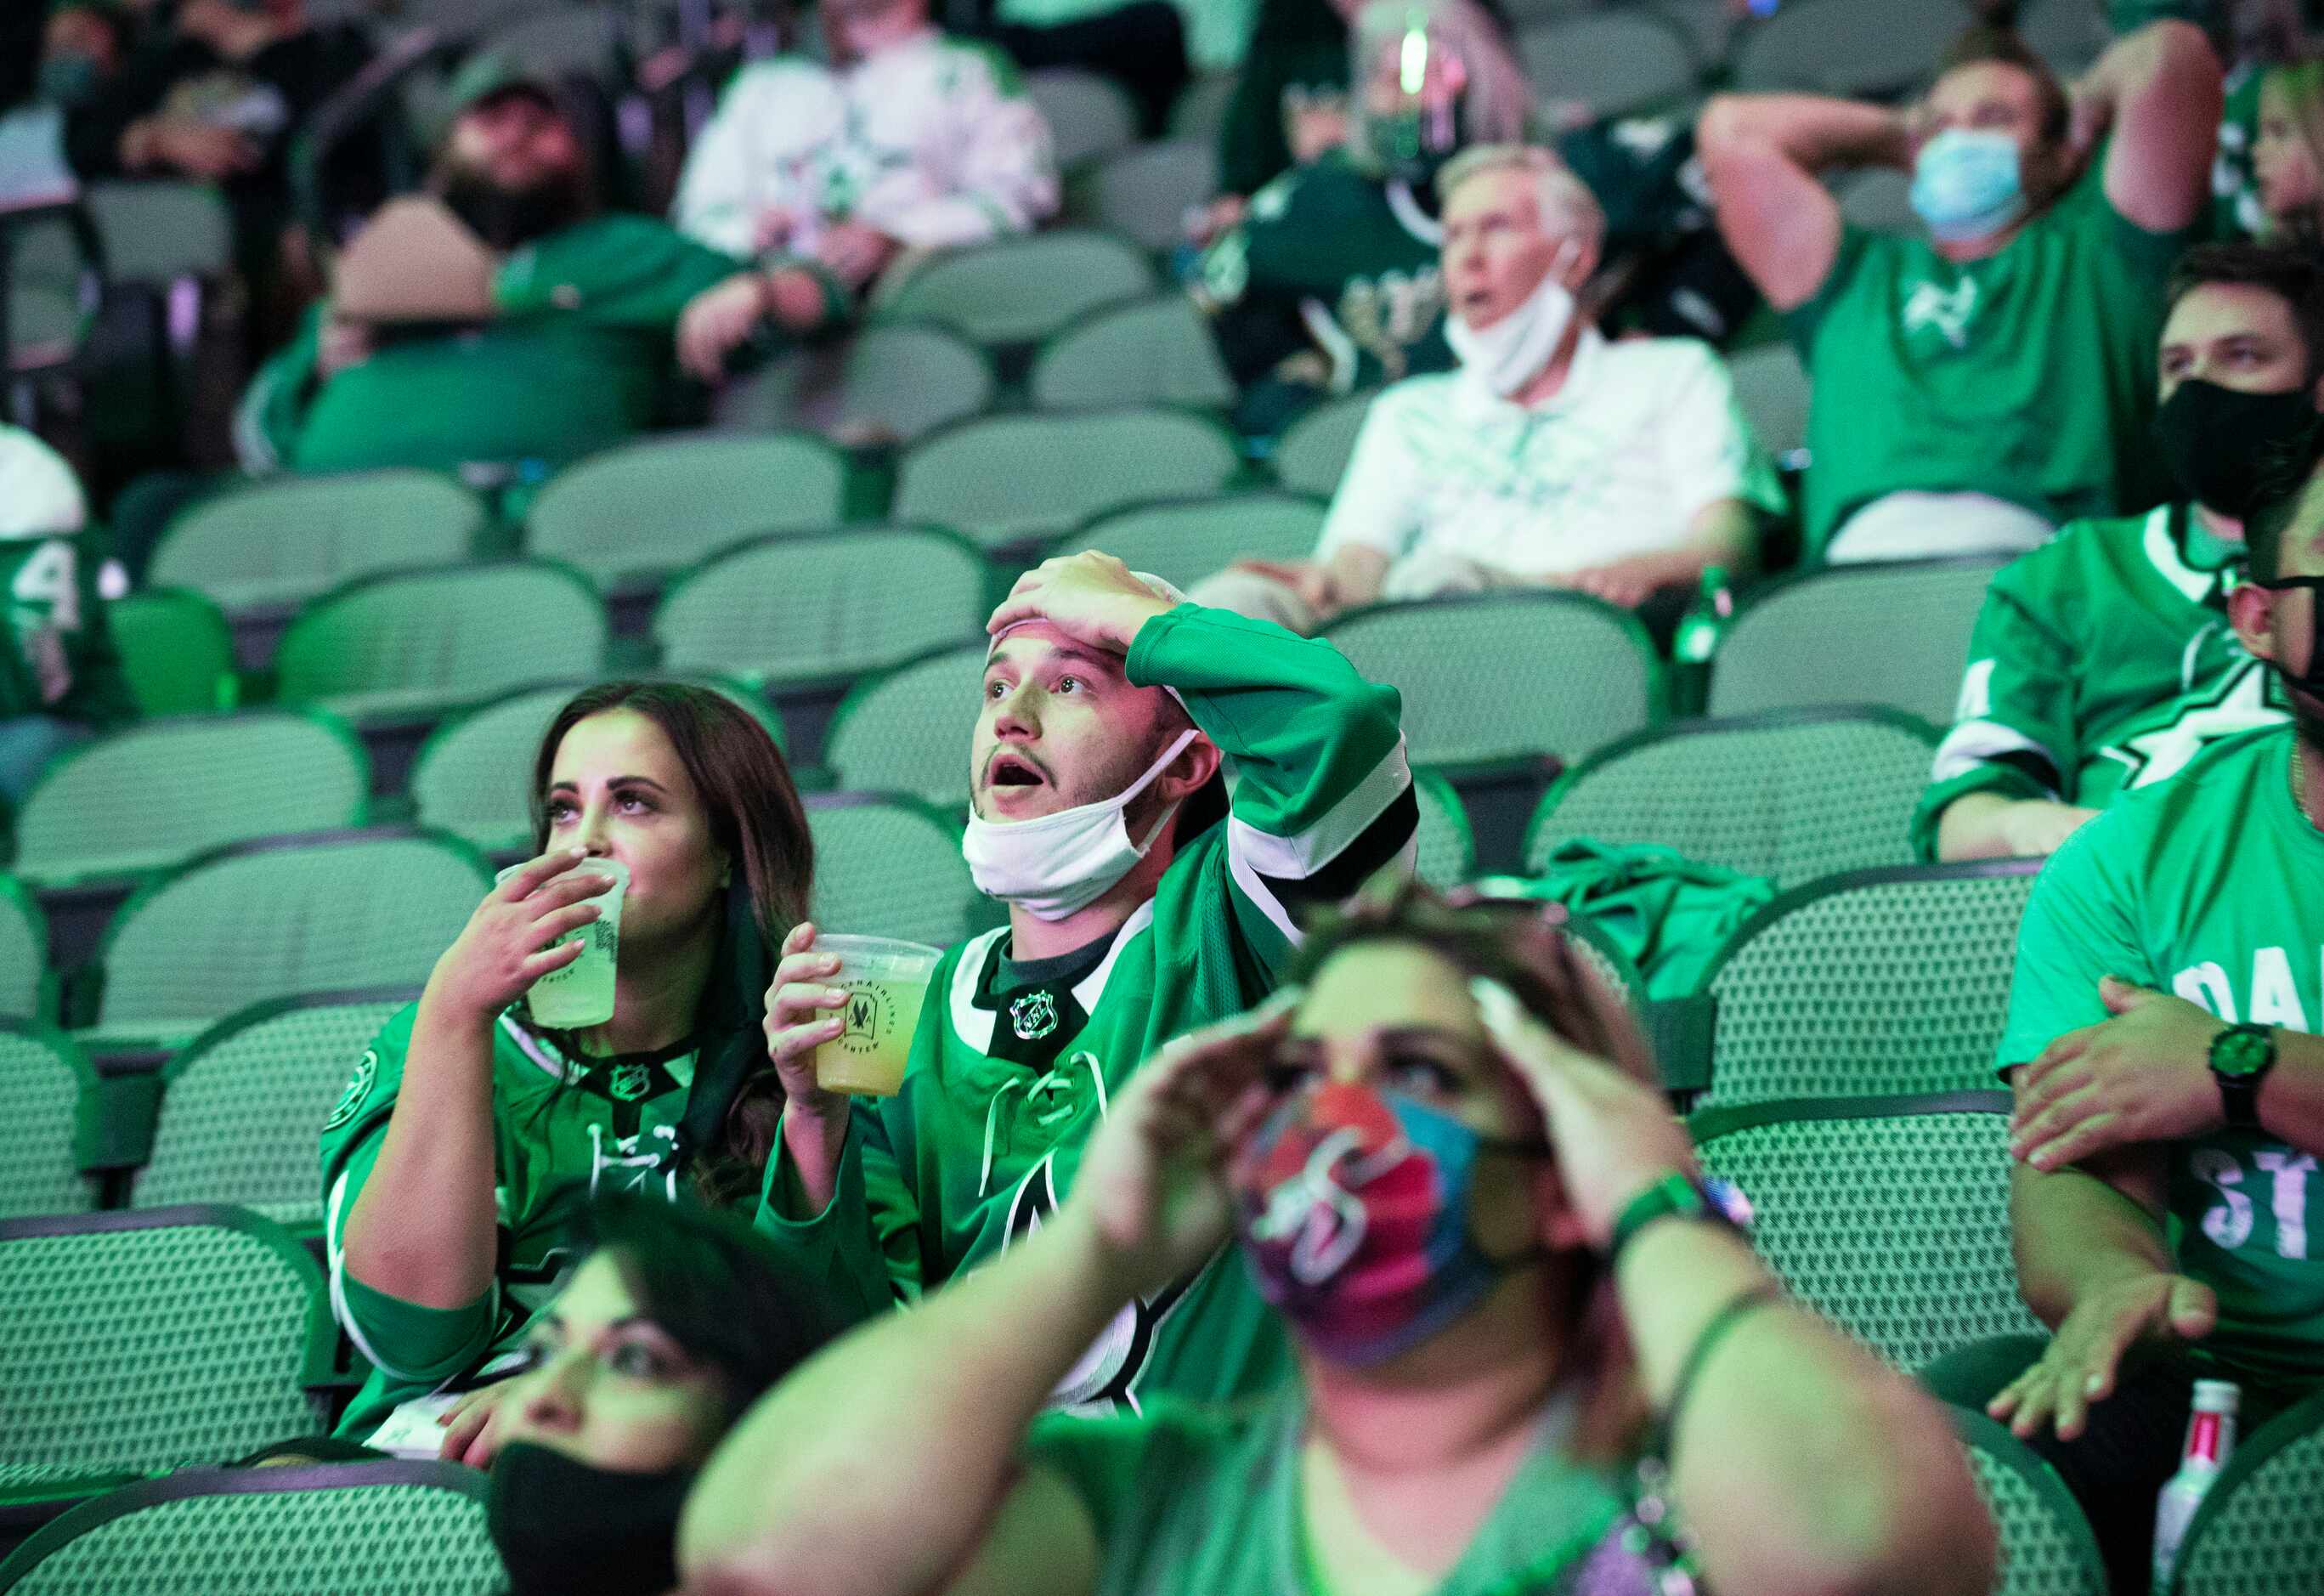 Fans react with disbelief while watching the Tampa Bay Lightning versus the Dallas Stars...